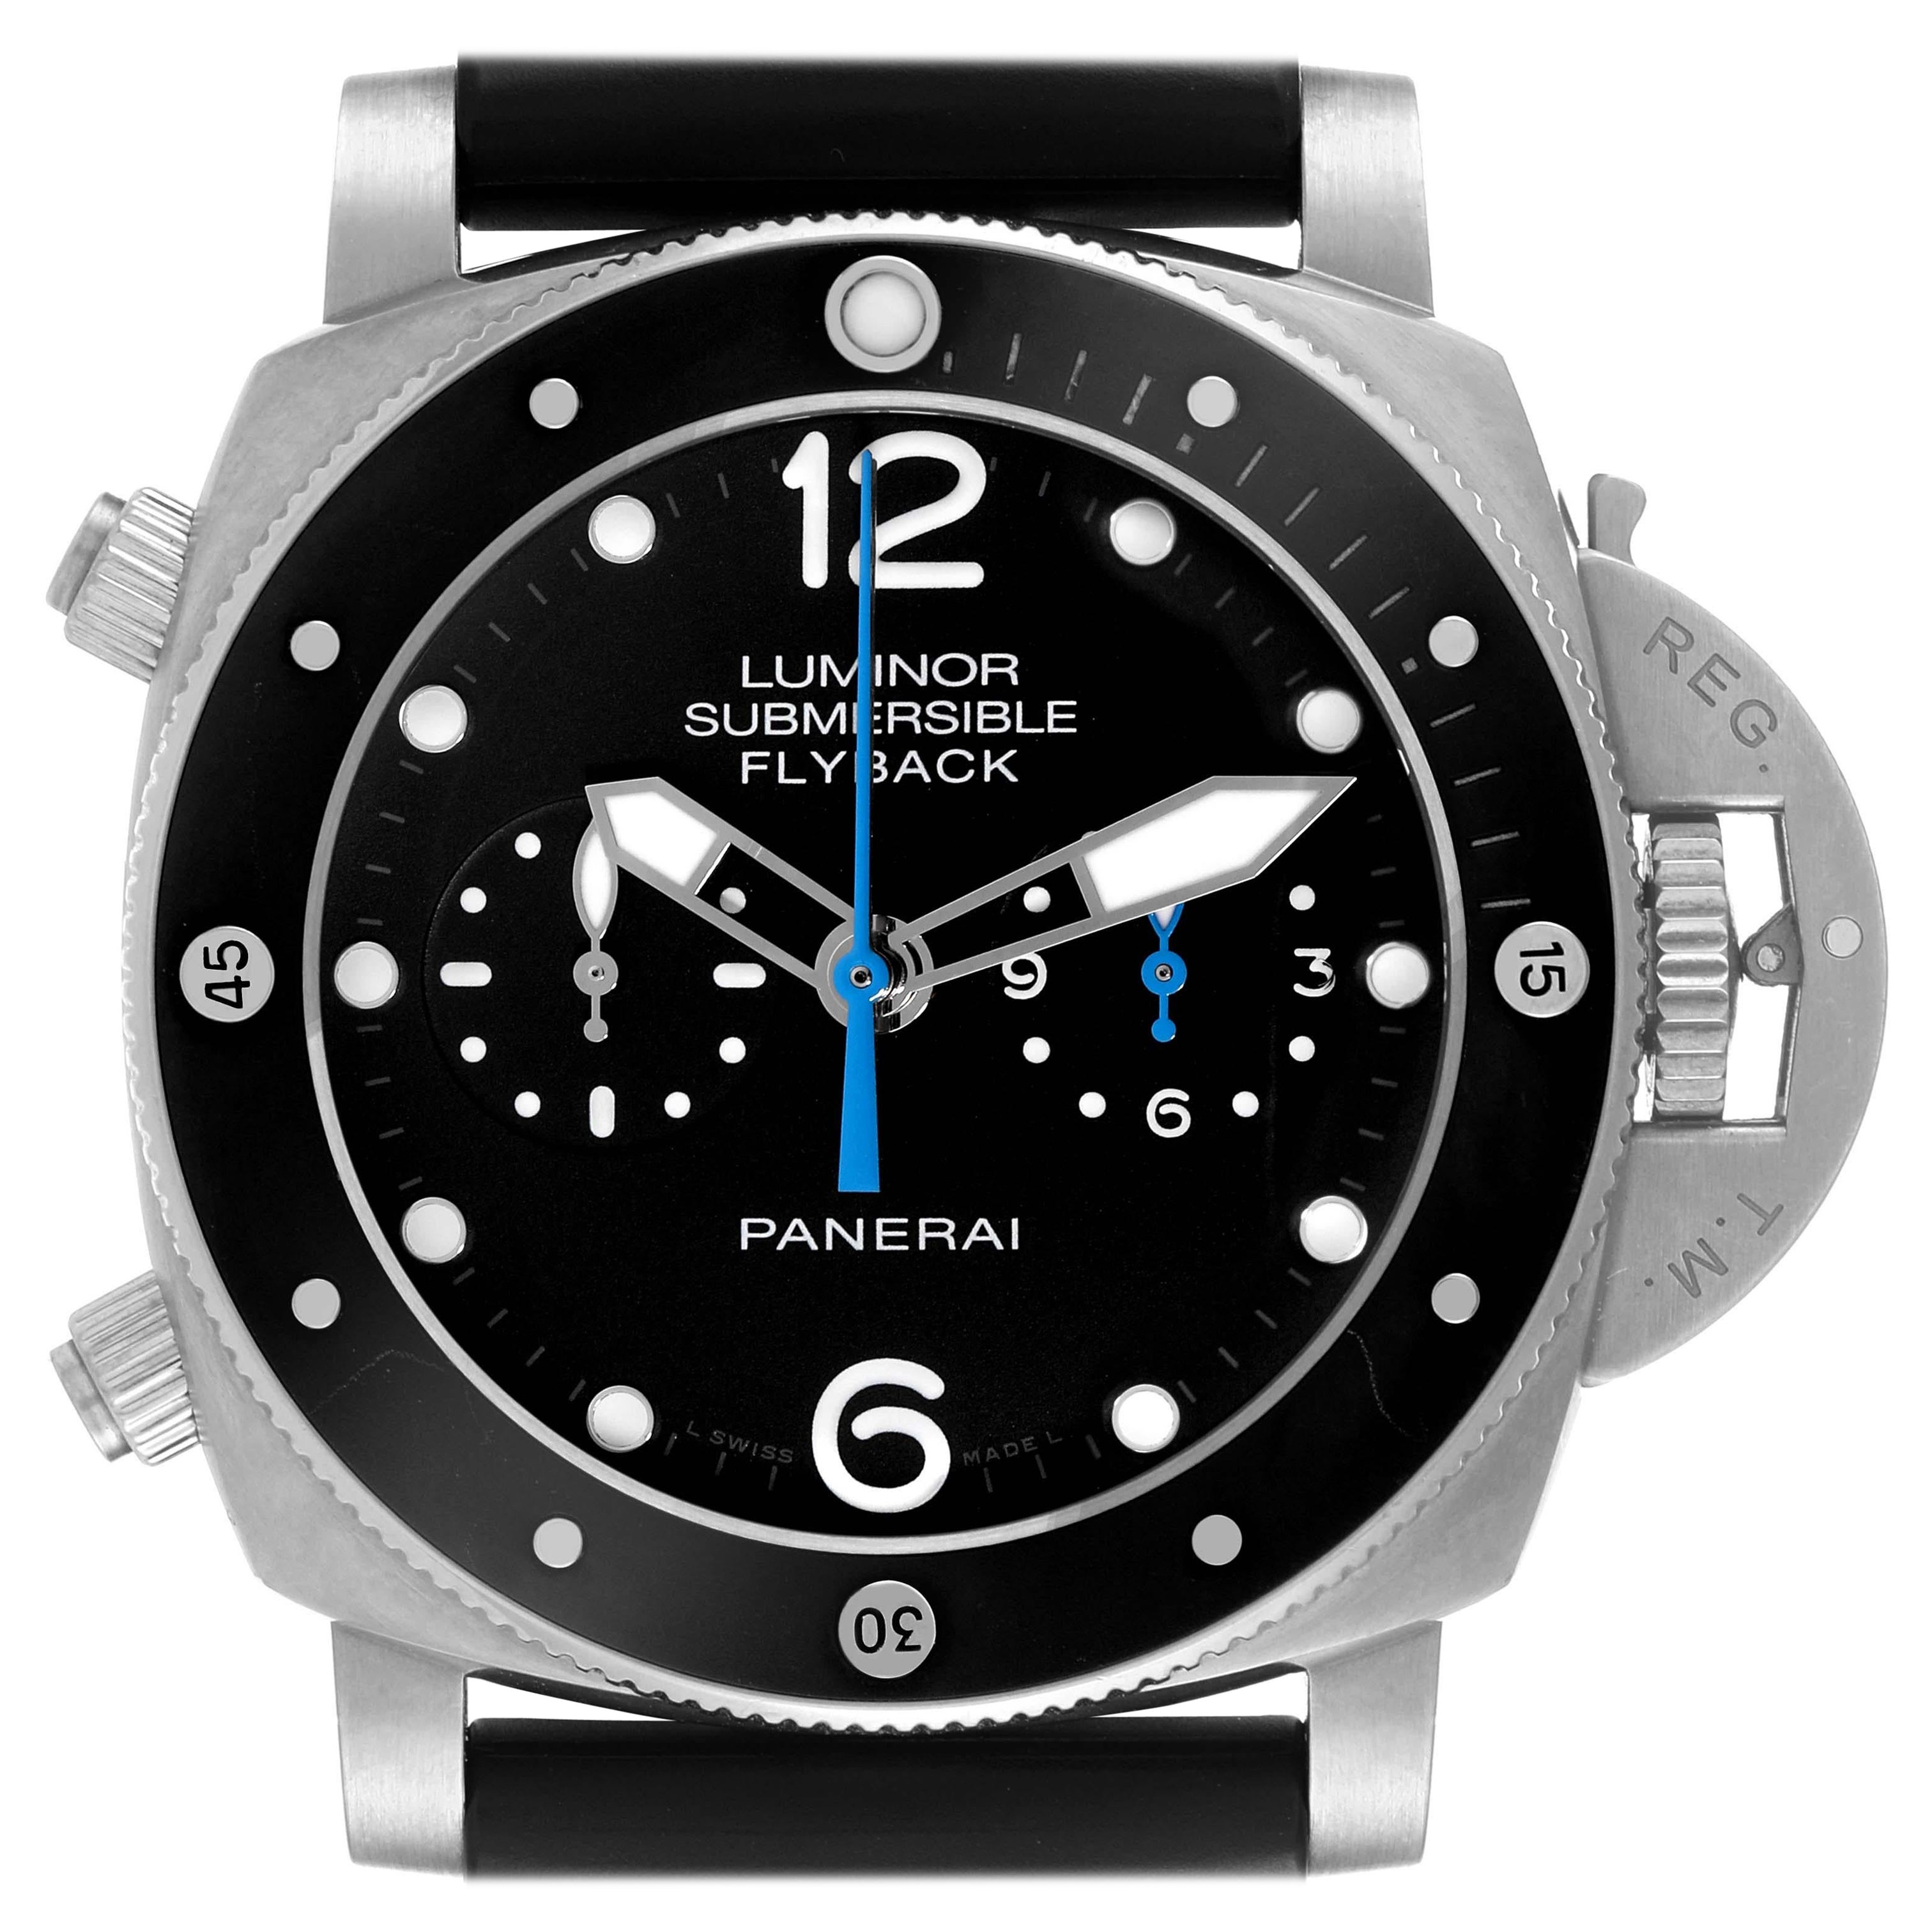 Panerai Luminor Submersible 3 Days Flyback Titanium Mens Watch PAM00615 Papers For Sale